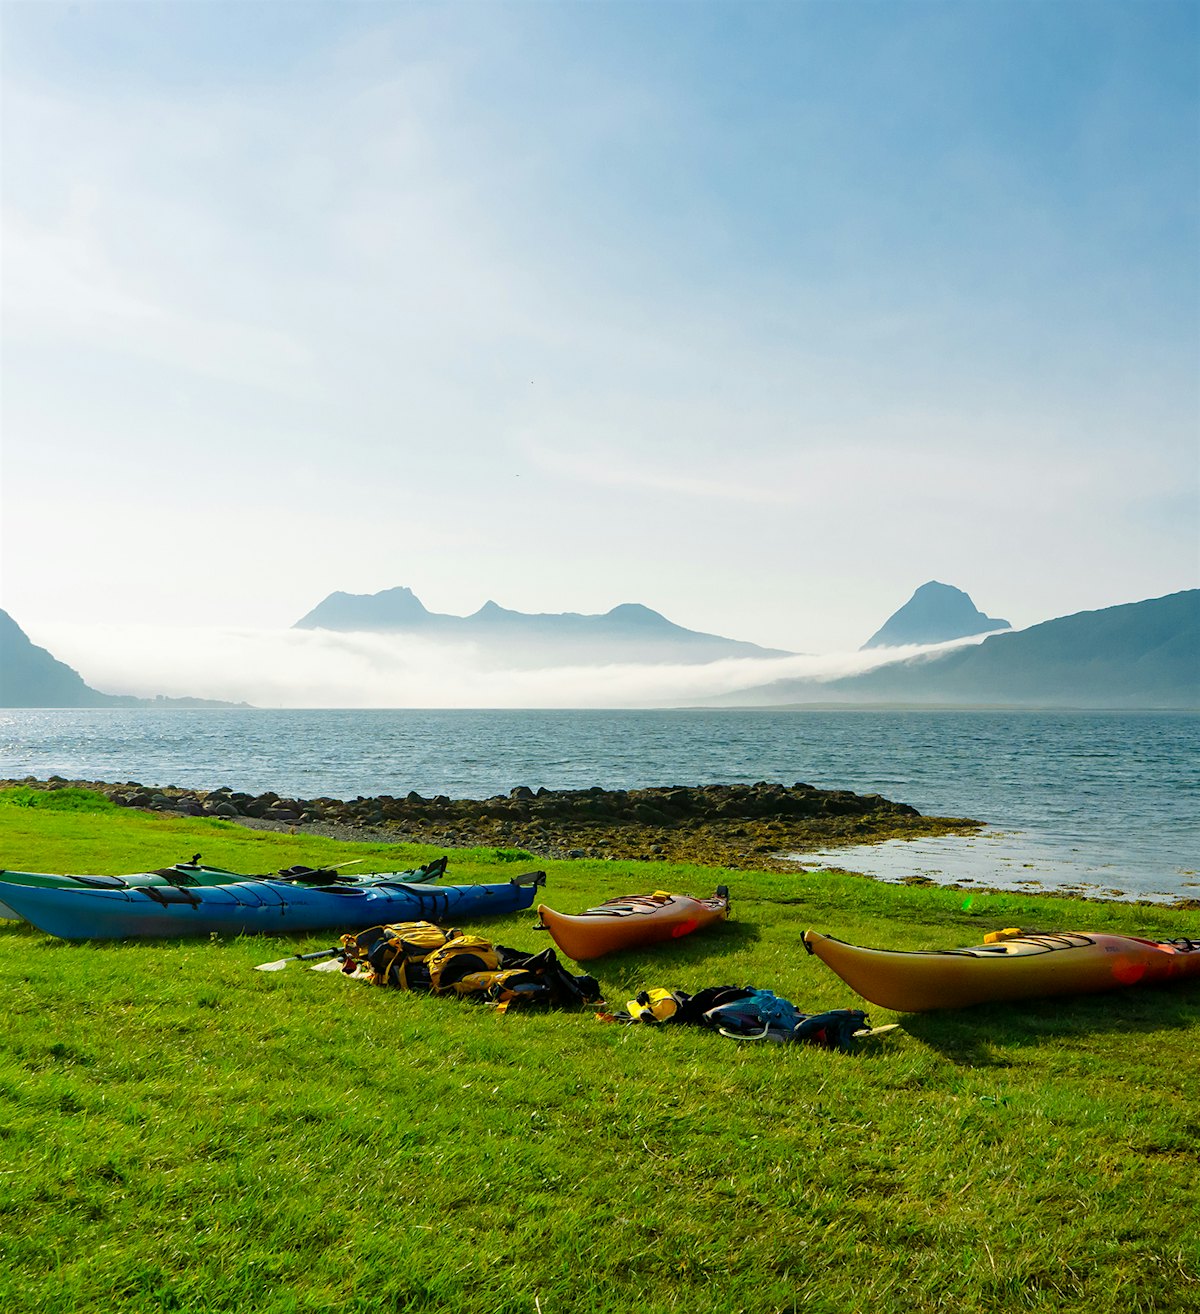 Kayaks lie on the shoreline with mountains in the background. Photo